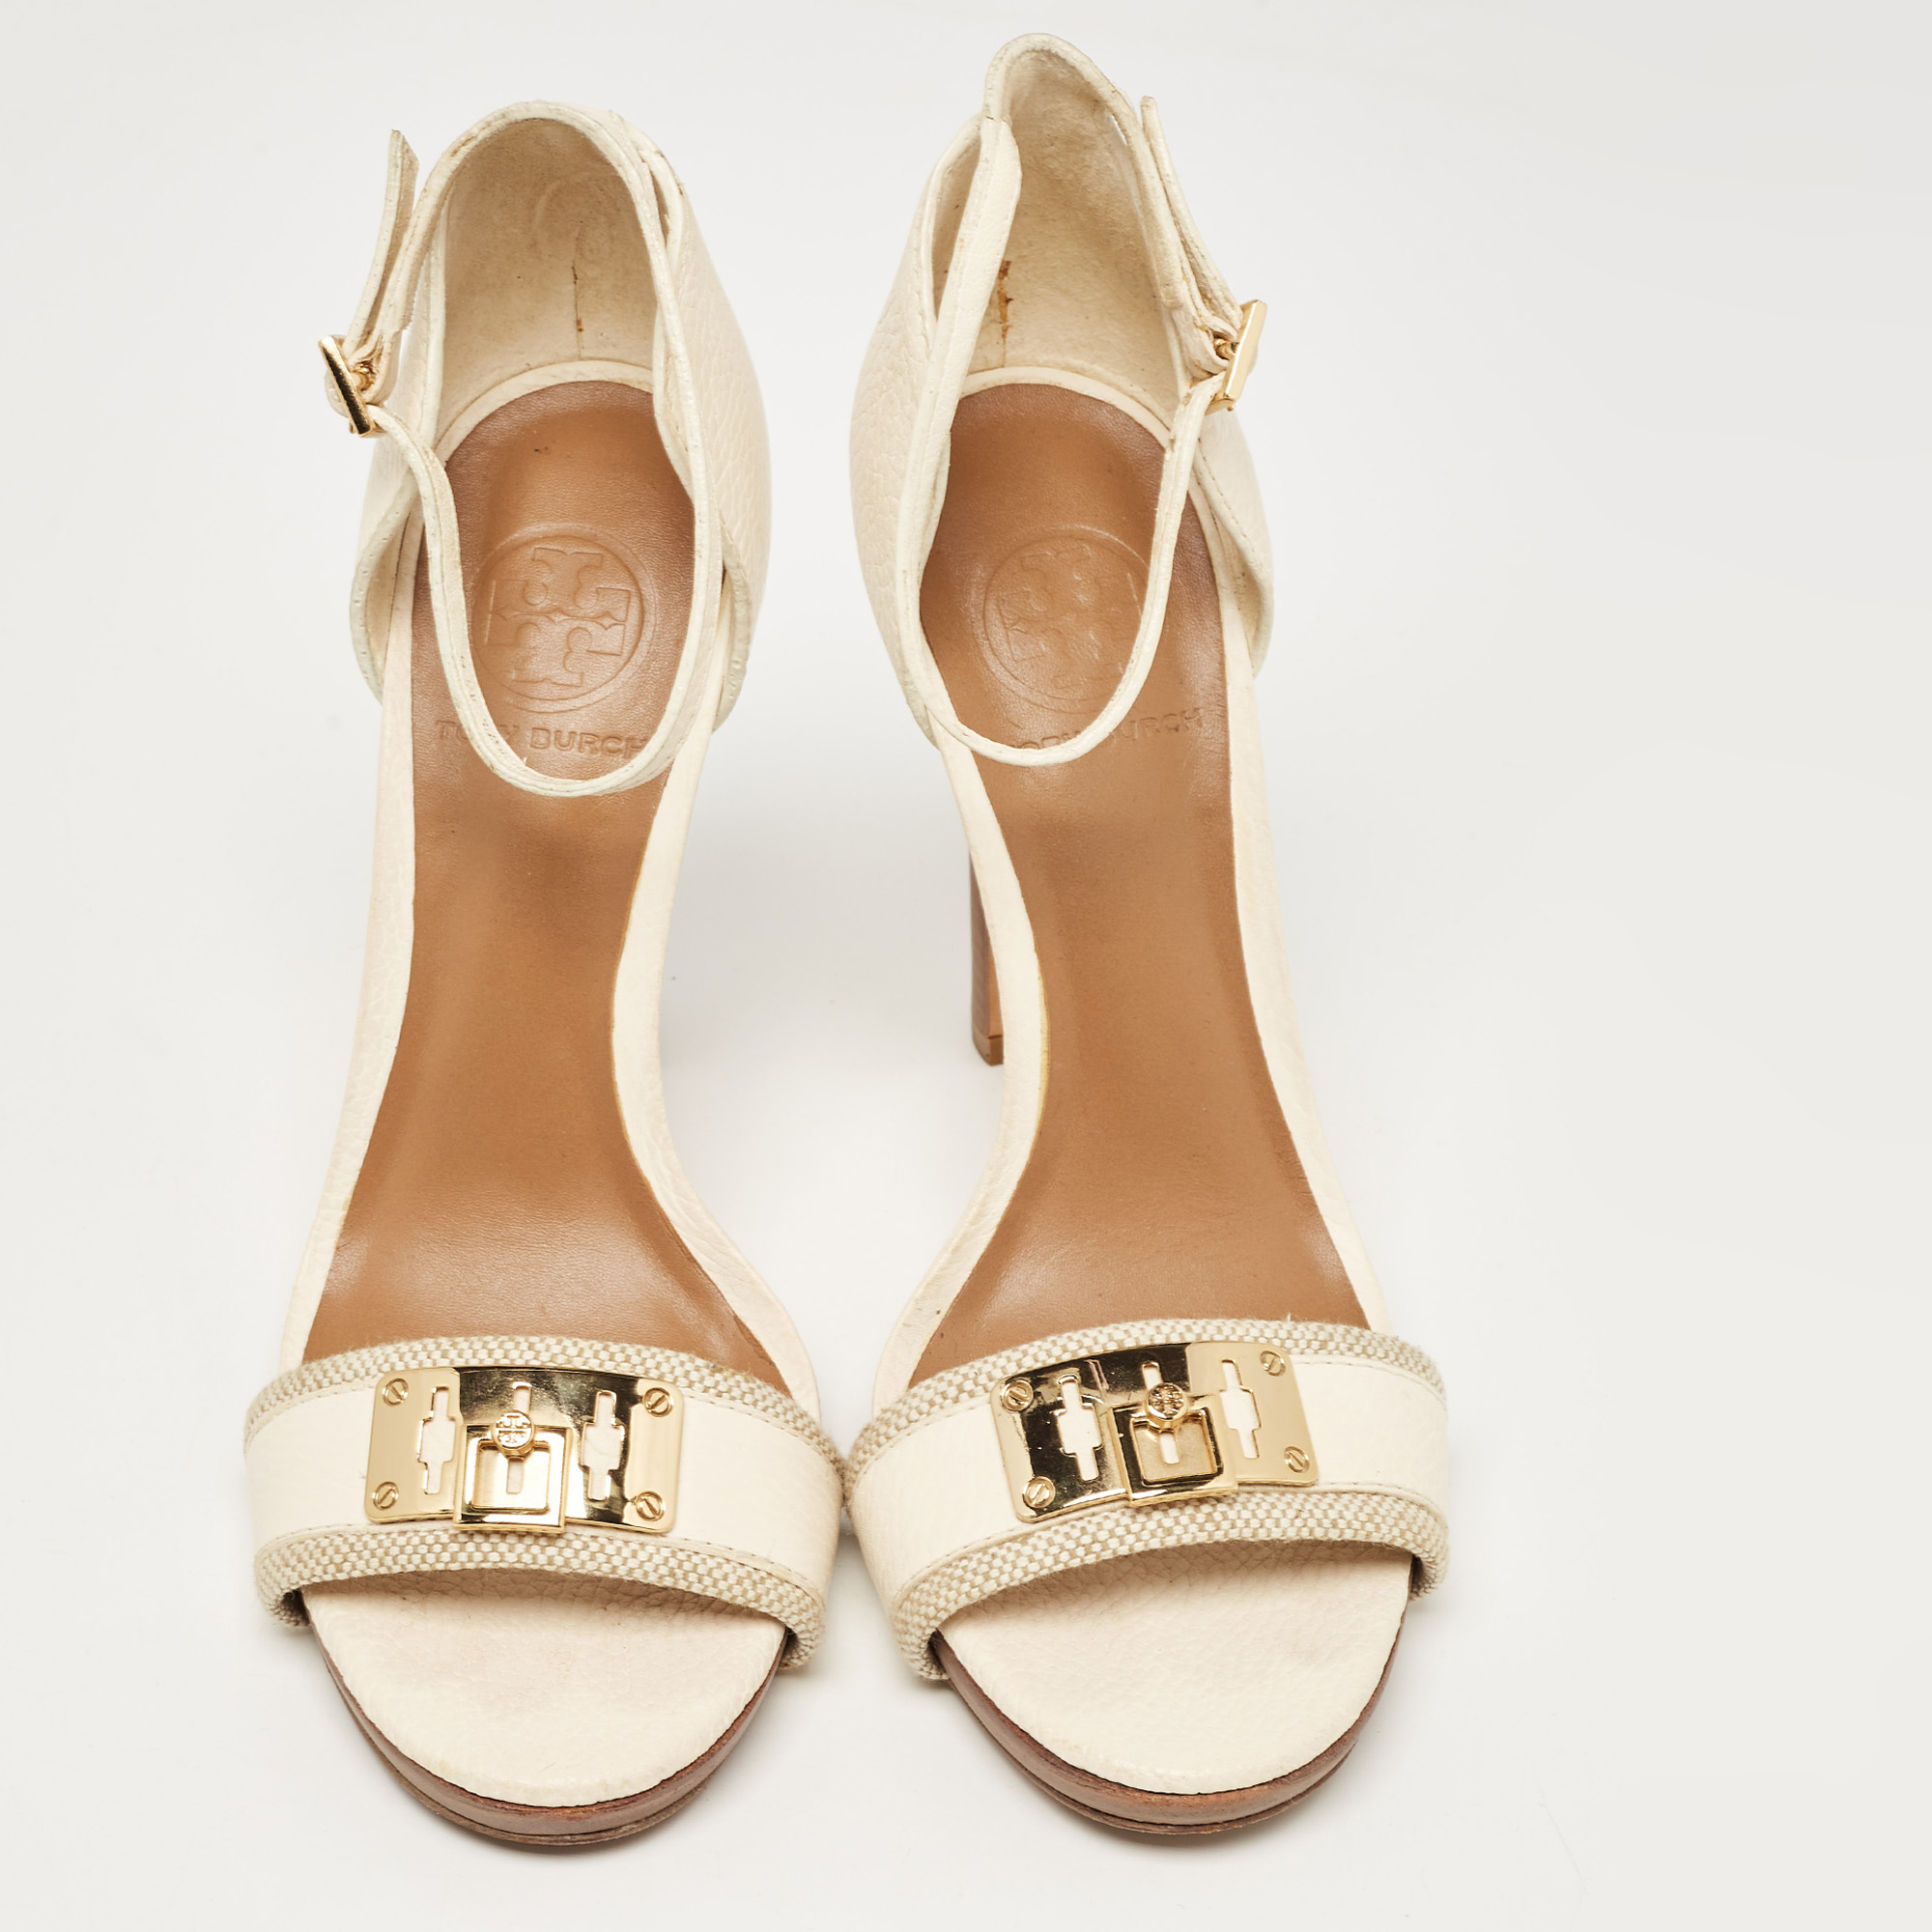 Tory Burch White Leather And Canvas Lock Ankle Strap Sandals Size 38.5